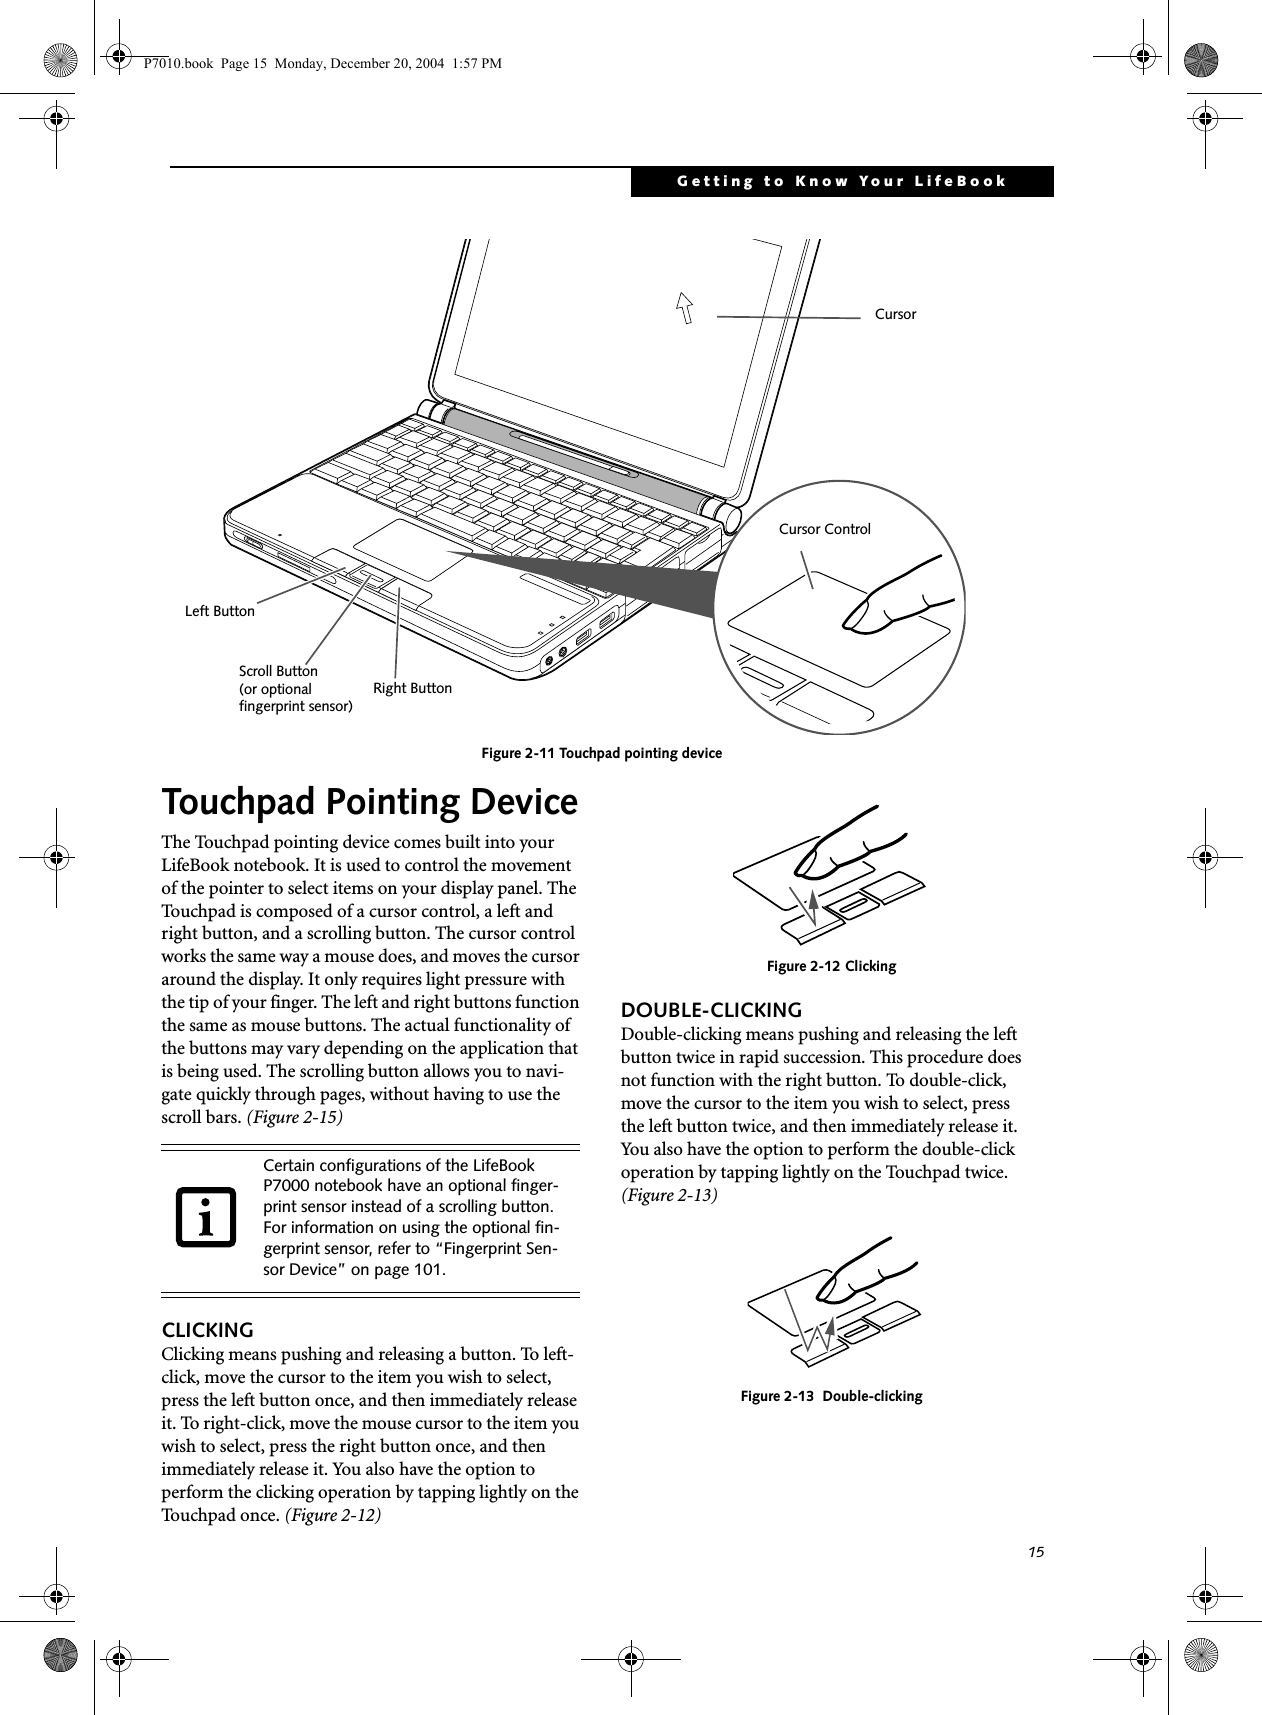 15Getting to Know Your LifeBookFigure 2-11 Touchpad pointing deviceTouchpad Pointing DeviceThe Touchpad pointing device comes built into your LifeBook notebook. It is used to control the movement of the pointer to select items on your display panel. The Touchpad is composed of a cursor control, a left and right button, and a scrolling button. The cursor control works the same way a mouse does, and moves the cursor around the display. It only requires light pressure with the tip of your finger. The left and right buttons function the same as mouse buttons. The actual functionality of the buttons may vary depending on the application that is being used. The scrolling button allows you to navi-gate quickly through pages, without having to use the scroll bars. (Figure 2-15)CLICKINGClicking means pushing and releasing a button. To left-click, move the cursor to the item you wish to select, press the left button once, and then immediately release it. To right-click, move the mouse cursor to the item you wish to select, press the right button once, and then immediately release it. You also have the option to perform the clicking operation by tapping lightly on the Touchpad once. (Figure 2-12)Figure 2-12 ClickingDOUBLE-CLICKINGDouble-clicking means pushing and releasing the left button twice in rapid succession. This procedure does not function with the right button. To double-click, move the cursor to the item you wish to select, press the left button twice, and then immediately release it. You also have the option to perform the double-click operation by tapping lightly on the Touchpad twice. (Figure 2-13)Figure 2-13  Double-clickingCursor ControlLeft ButtonRight ButtonScroll ButtonCursor(or optionalfingerprint sensor)Certain configurations of the LifeBook P7000 notebook have an optional finger-print sensor instead of a scrolling button. For information on using the optional fin-gerprint sensor, refer to “Fingerprint Sen-sor Device” on page 101.P7010.book  Page 15  Monday, December 20, 2004  1:57 PM